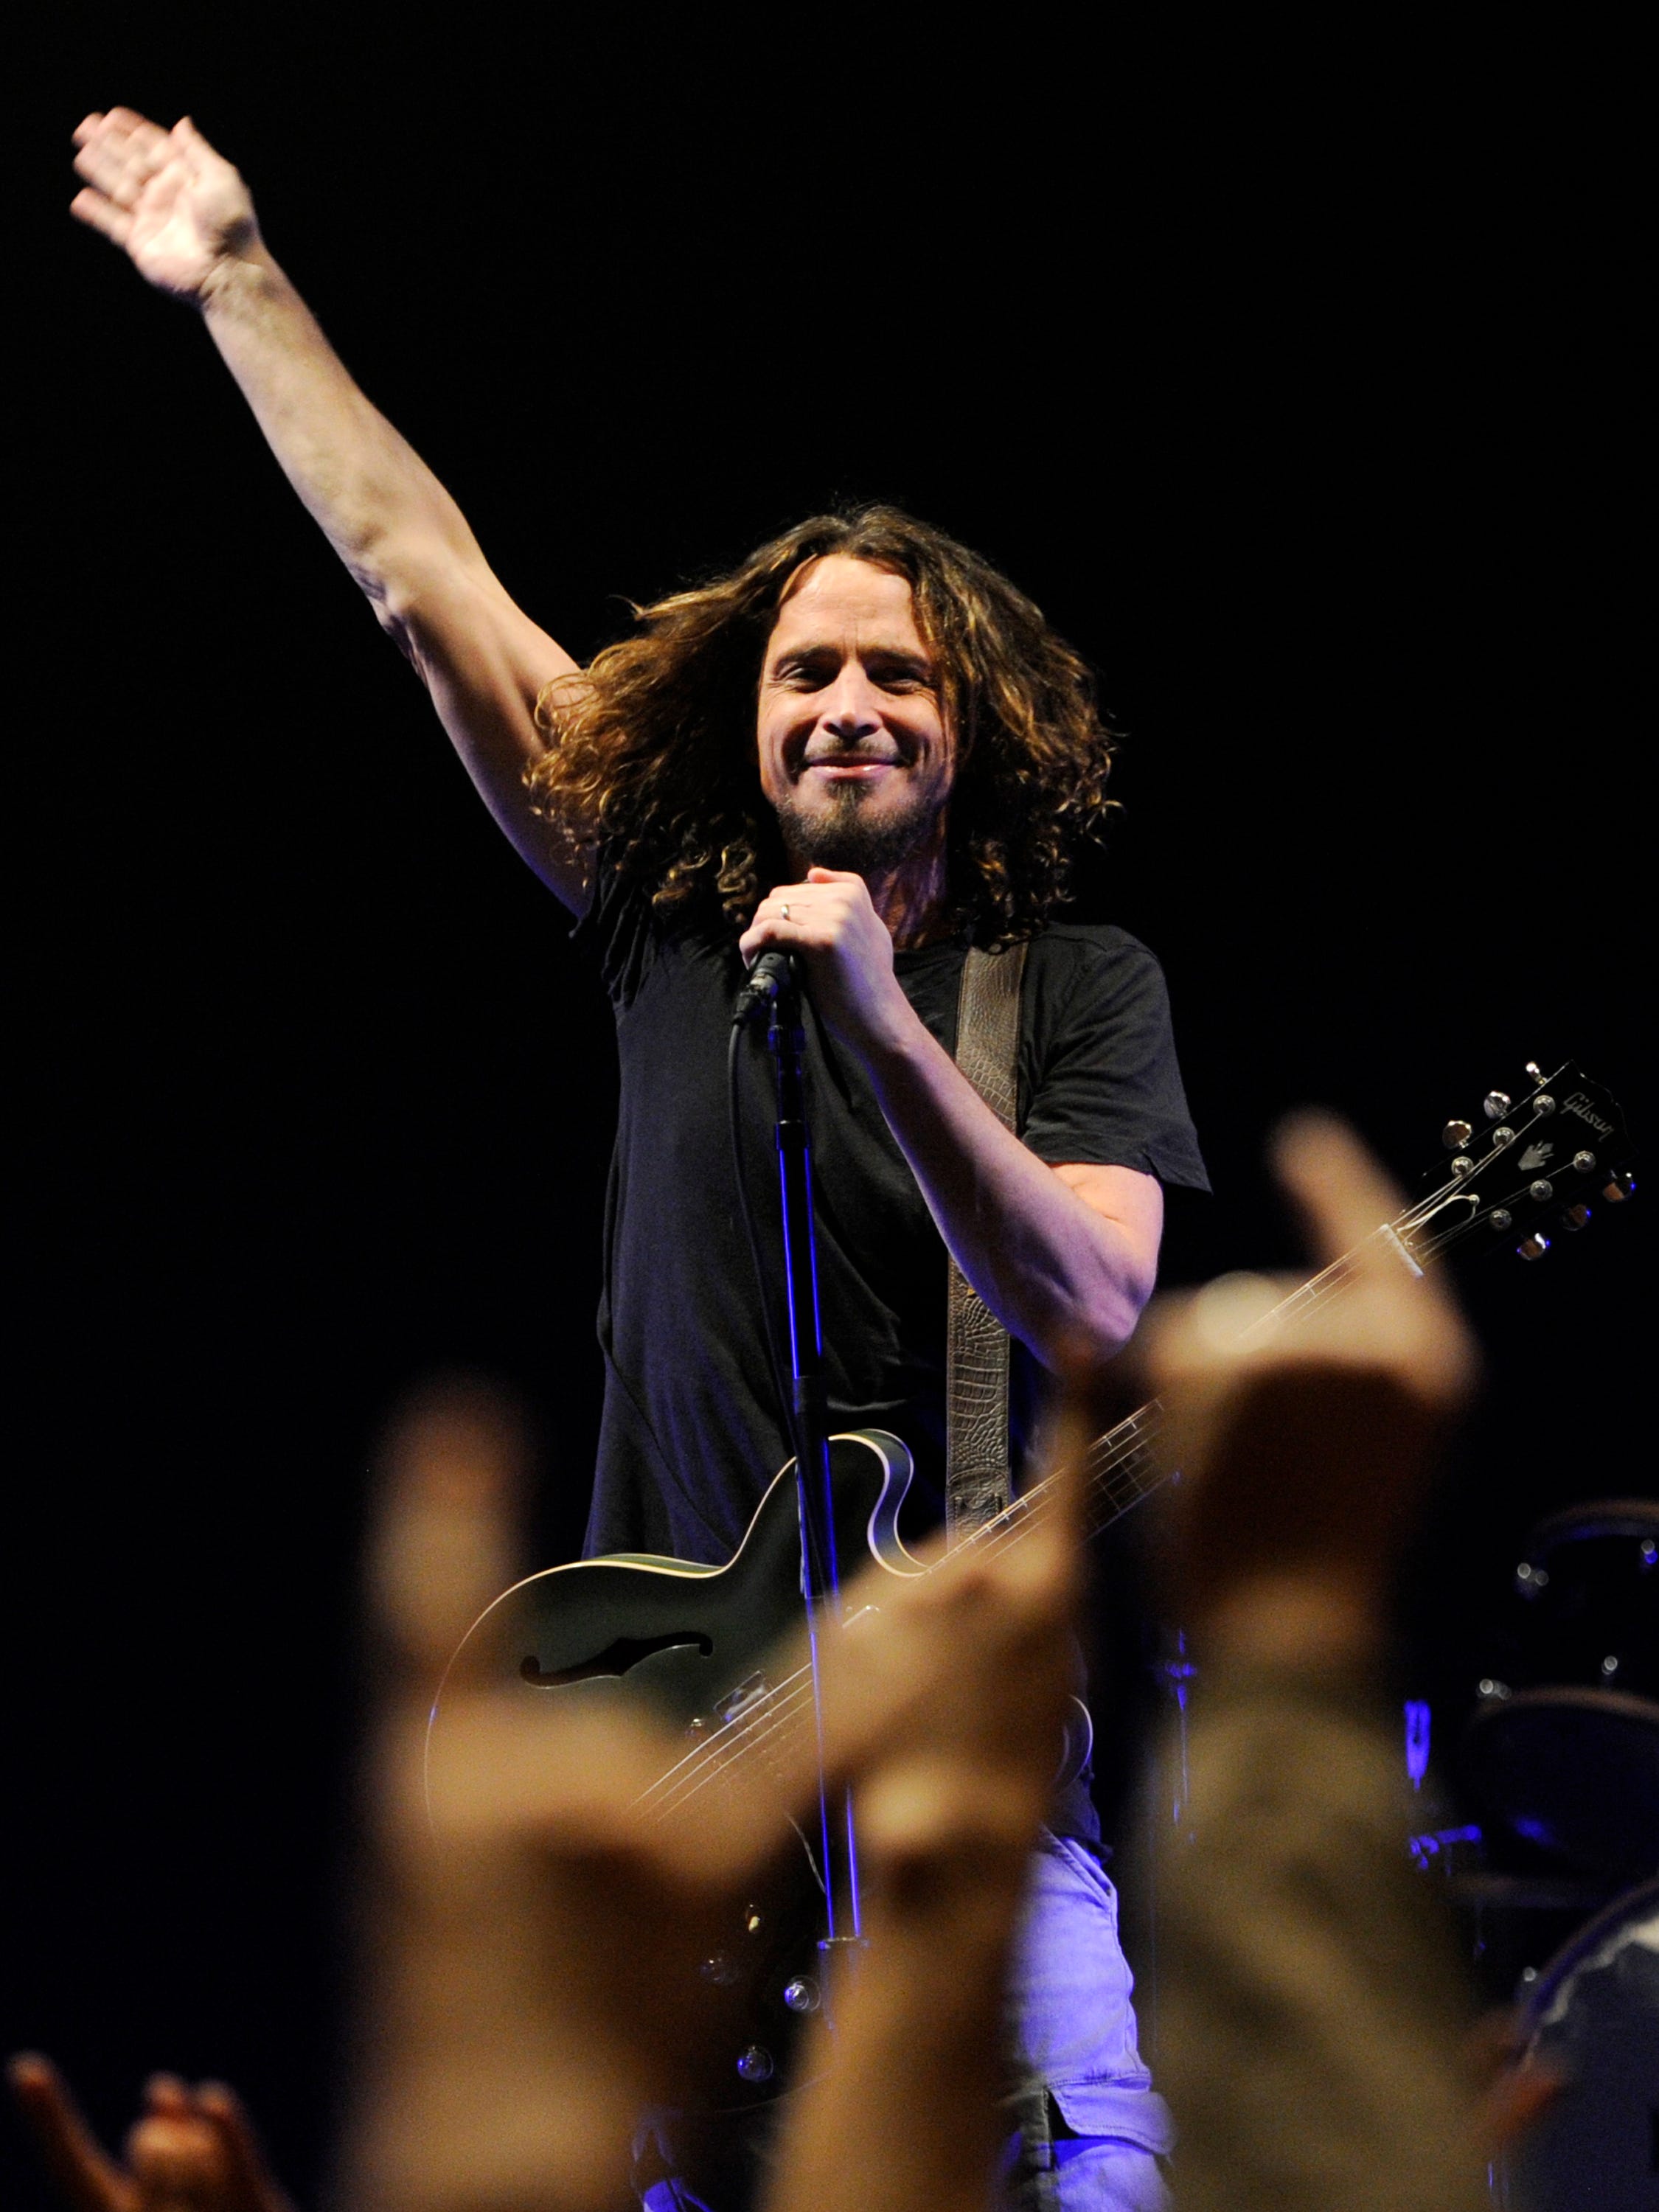 Chris Cornell of Soundgarden performs during the band's concert at the Wiltern in Los Angeles, Feb. 15, 2013.